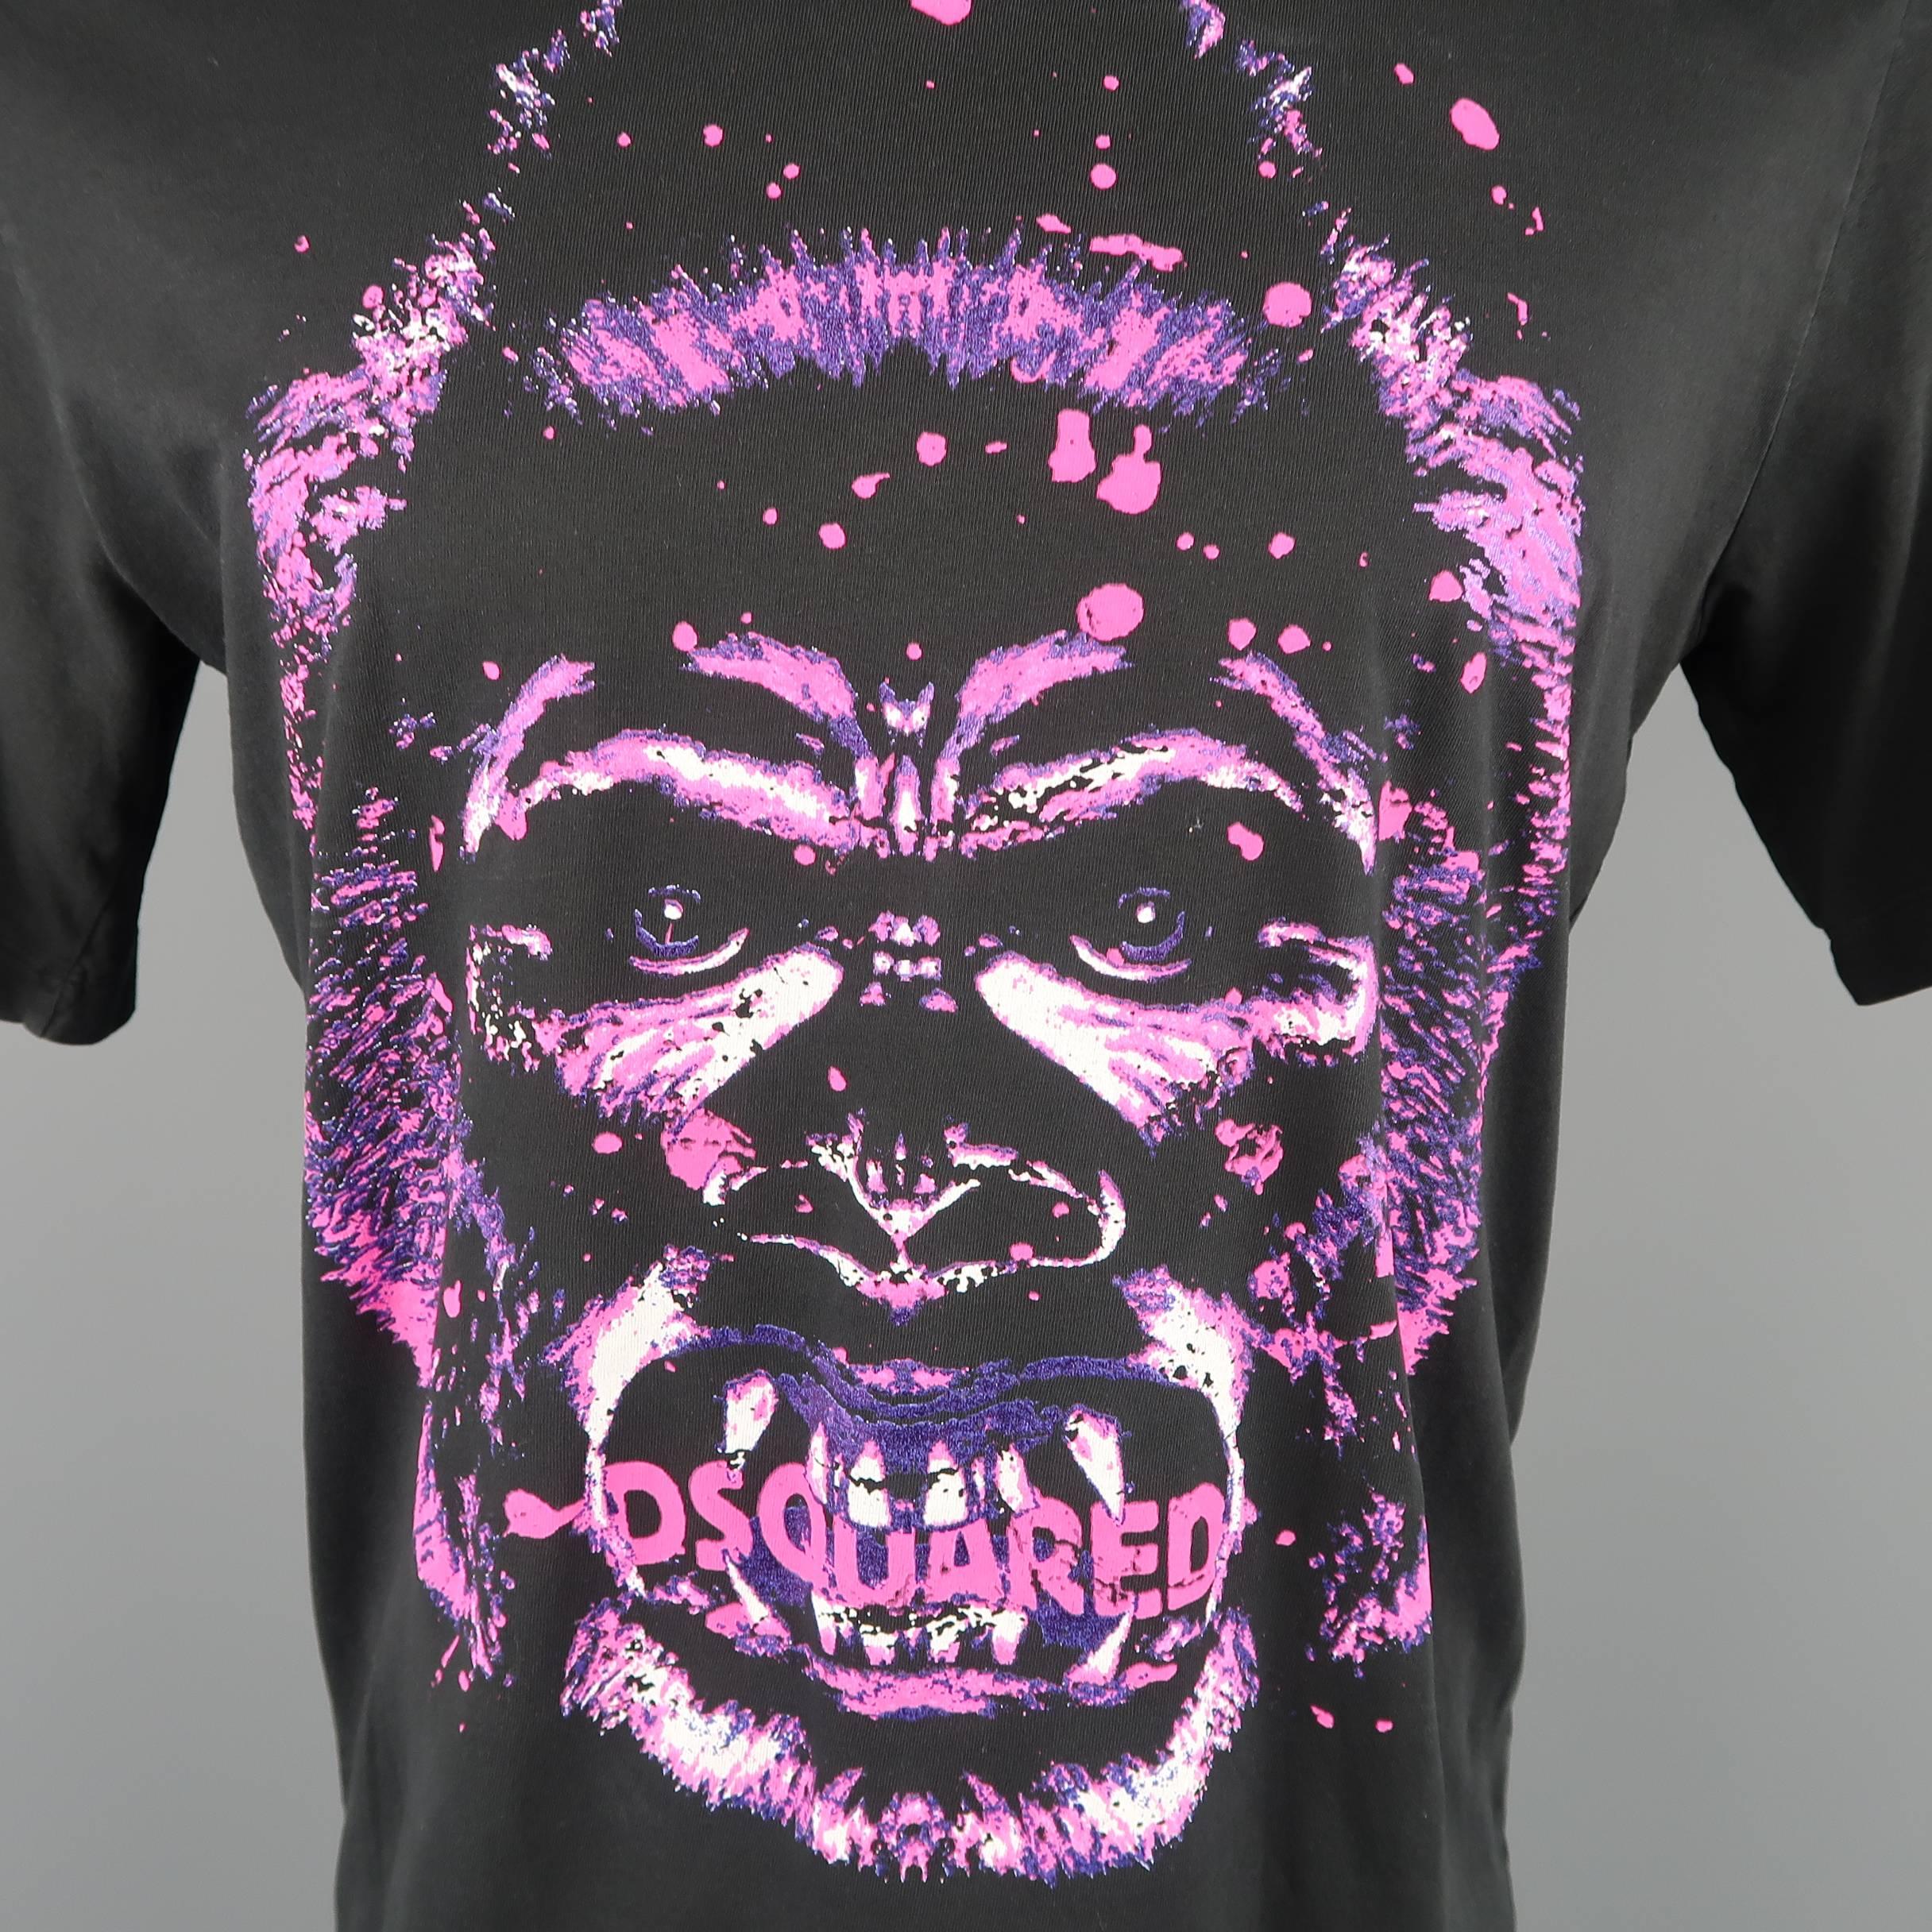 DSQUARED2 t shirt comes in black cotton jersey with a crewneck and pink and purple sparkle gorilla graphic print. Minor wear. Made in Italy.
 
Good Condition with Tags.
Marked: M
 
Measurements:
 
Shoulder: 19 in.
Chest: 42 in.
Sleeve: 9 in.
Length: